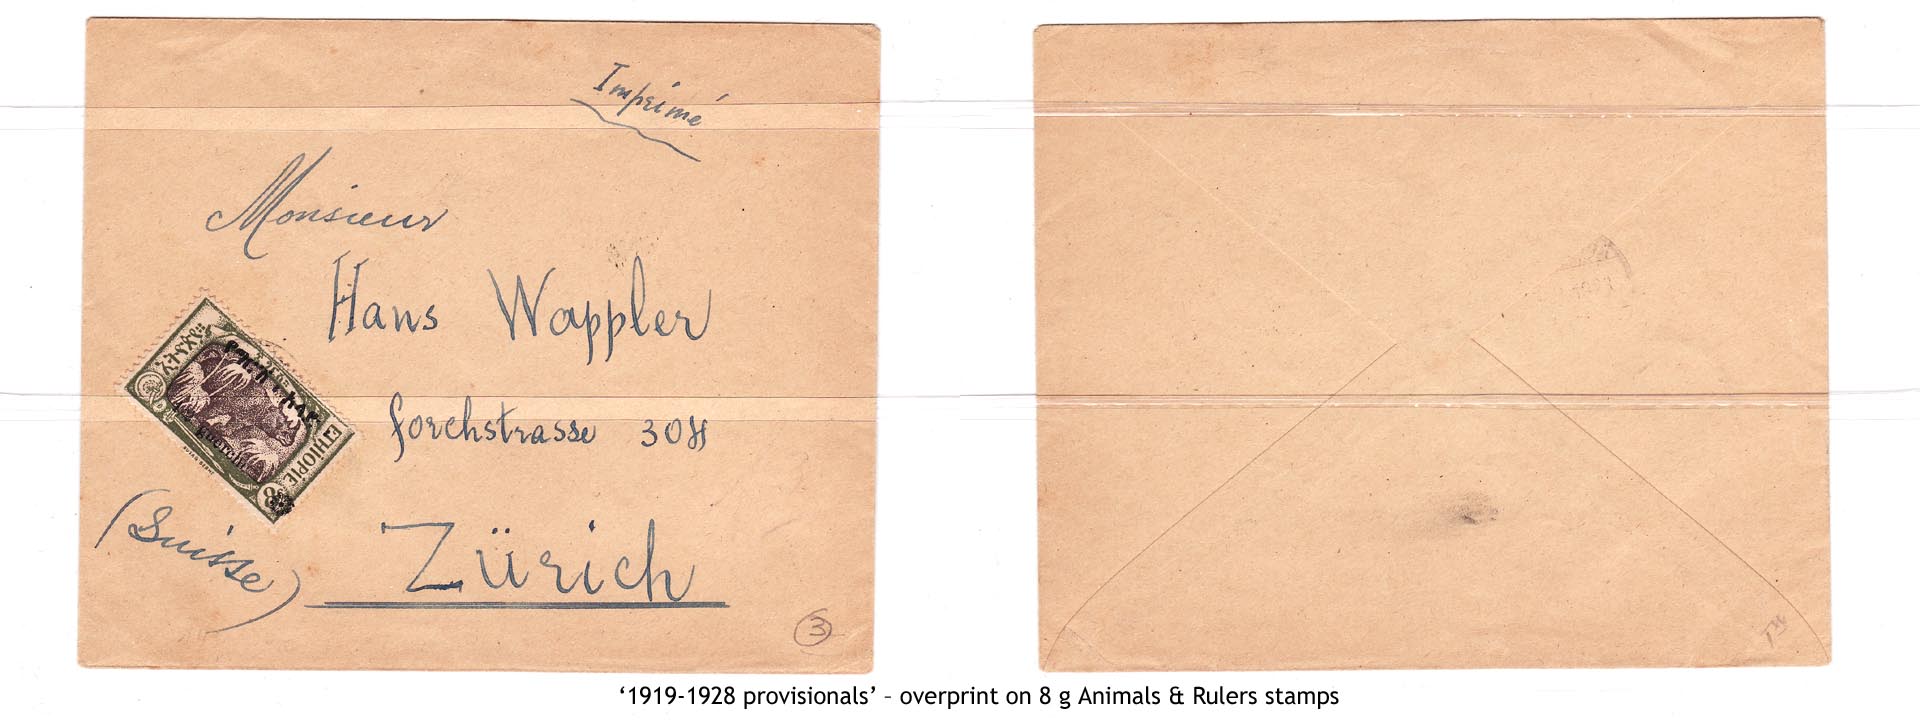 1919-1928 provisionals’ – overprint on 8 g Animals & Rulers stamps